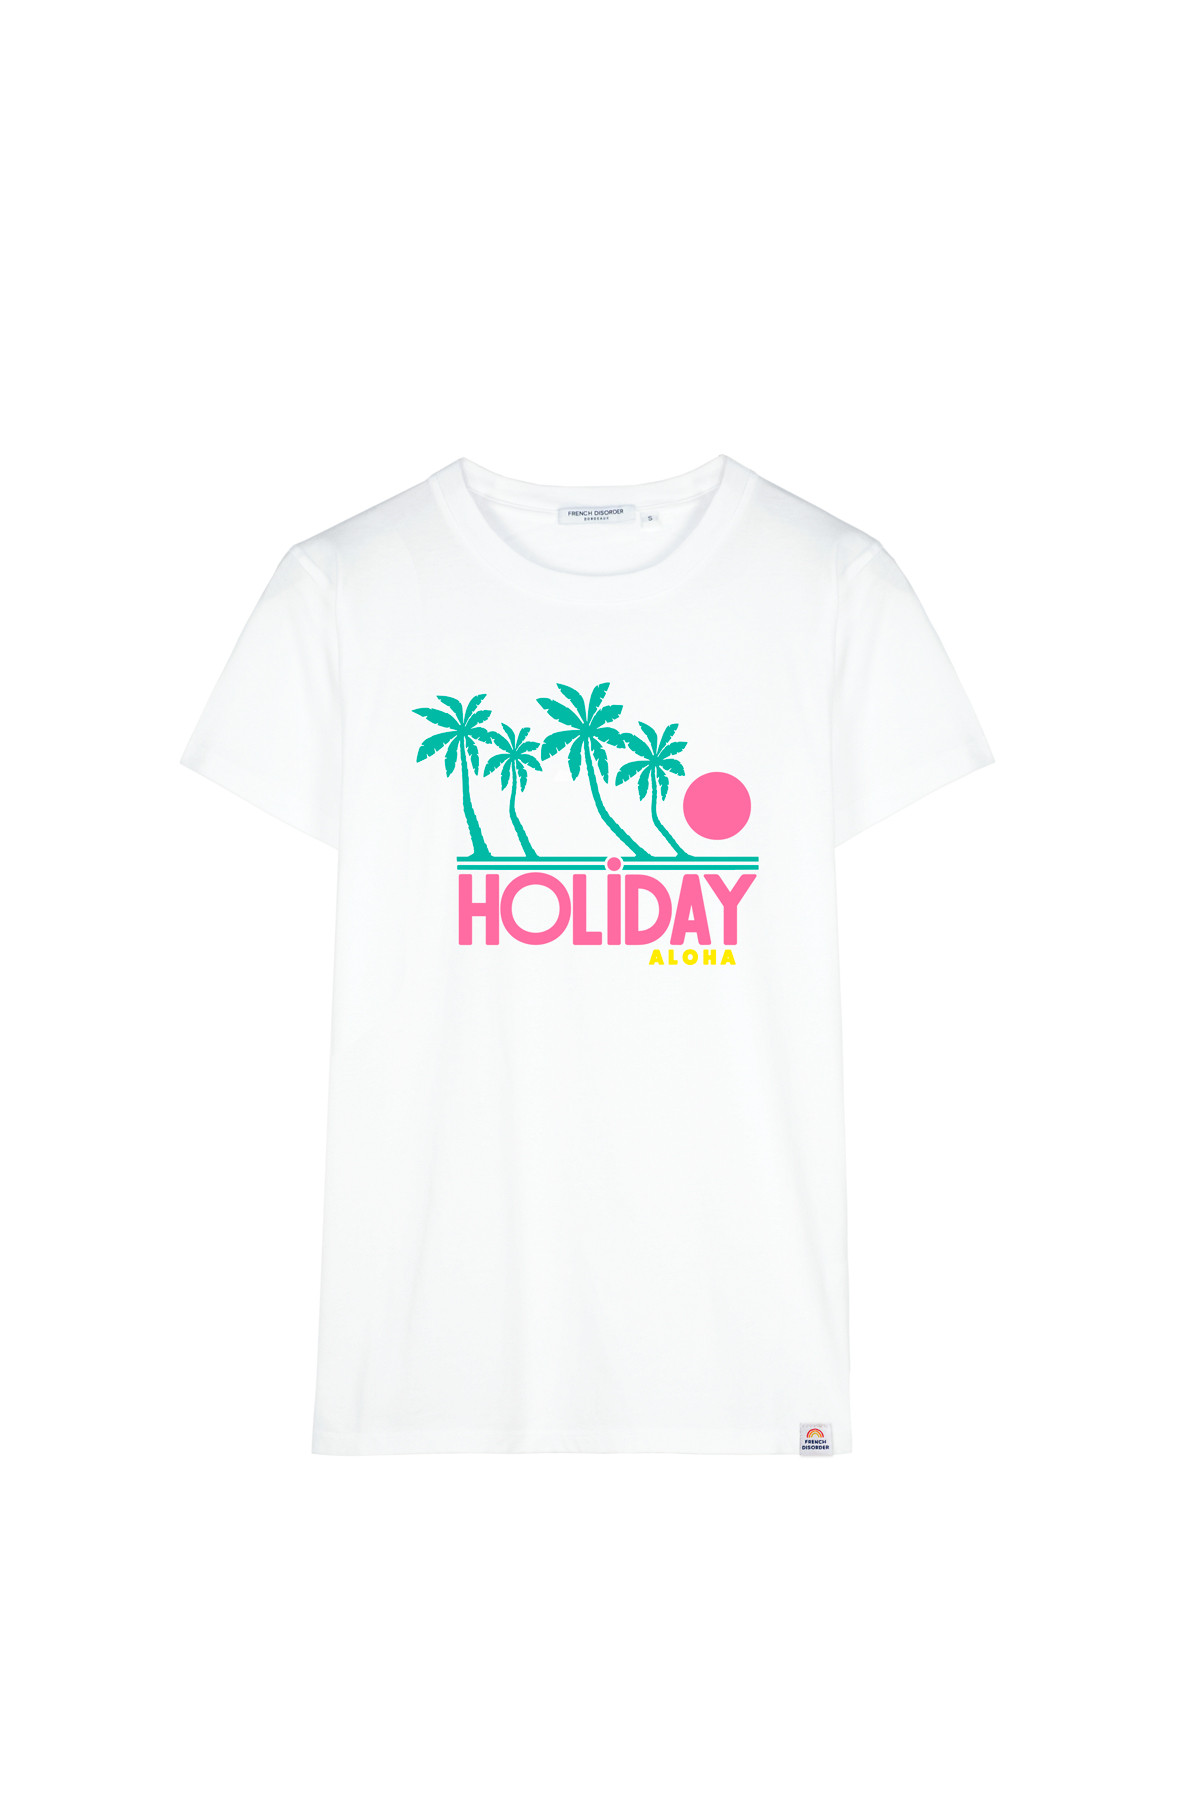 Photo de T-SHIRTS COL ROND Tshirt HOLIDAY chez French Disorder